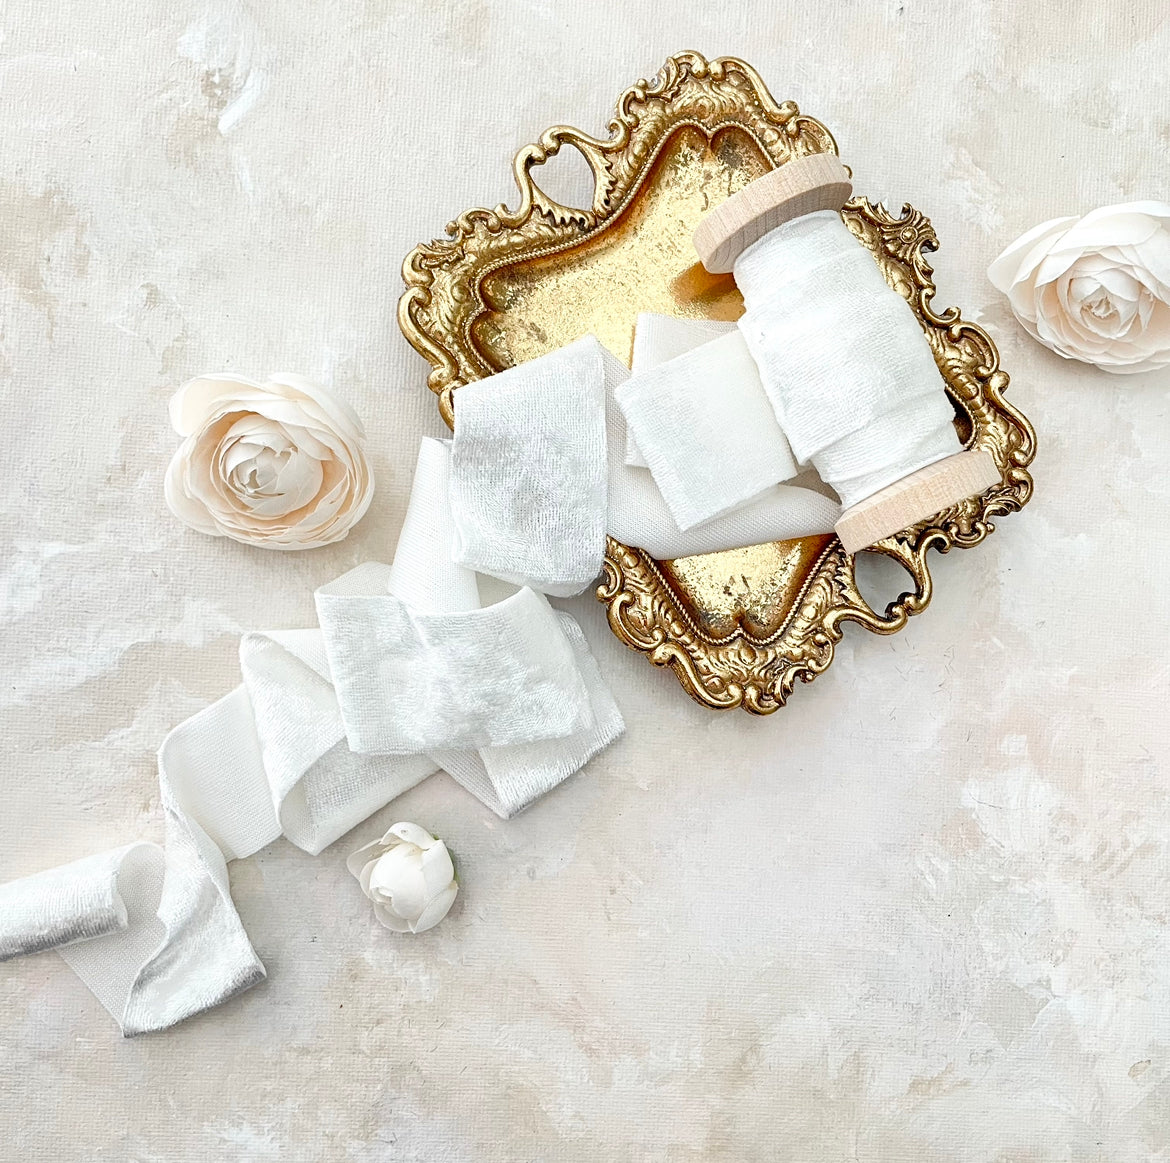 Velvet ivory ribbon on vintage gold tray - Wedding Flat lay props from Champagne & GRIT